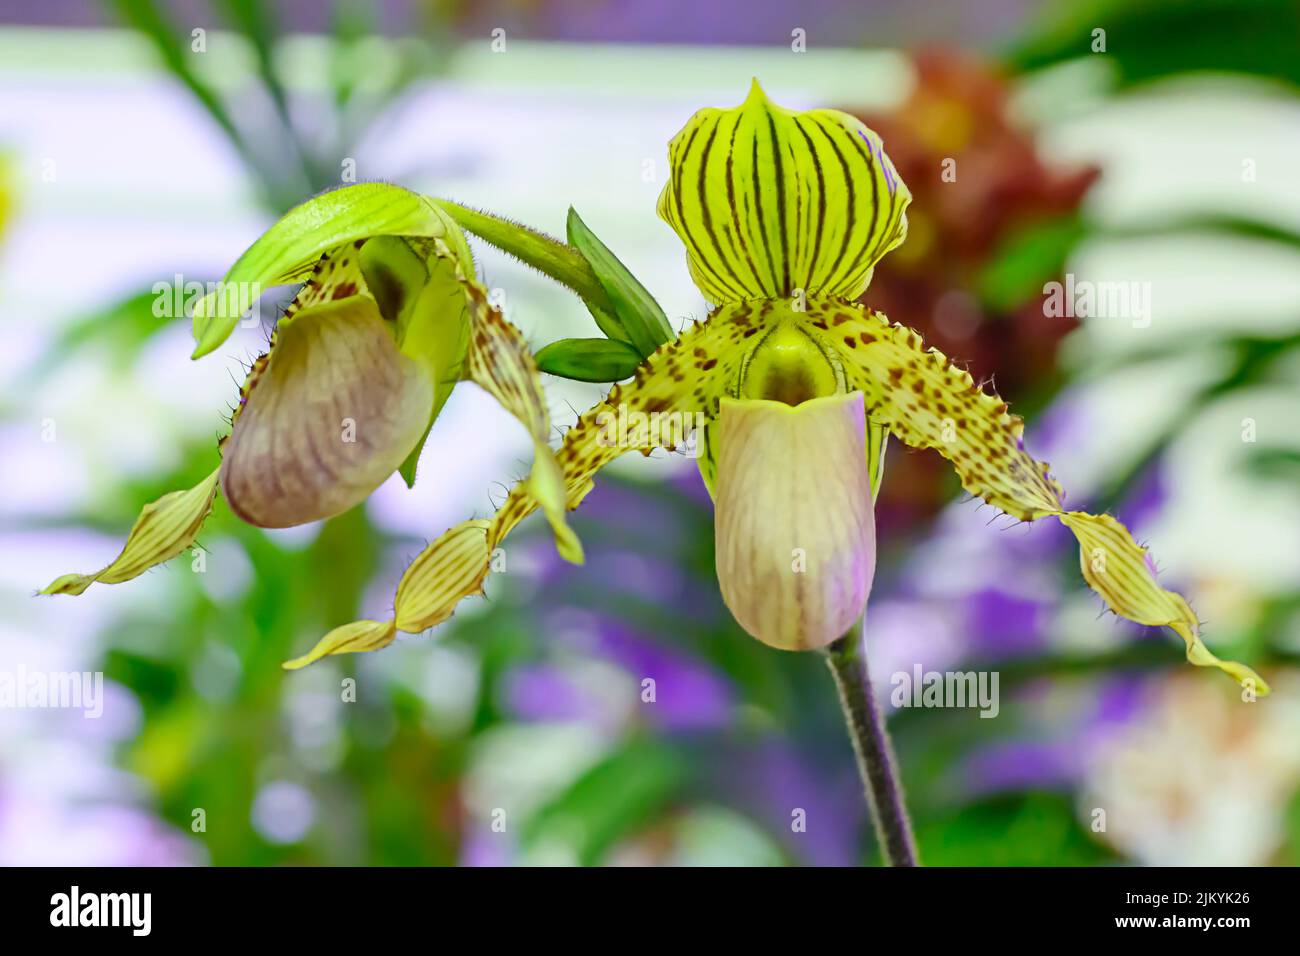 Paphiopedilum, often called the Venus slipper, is a genus of the Lady slipper orchid subfamily Cypripedioideae of the flowering plant family Orchidace Stock Photo